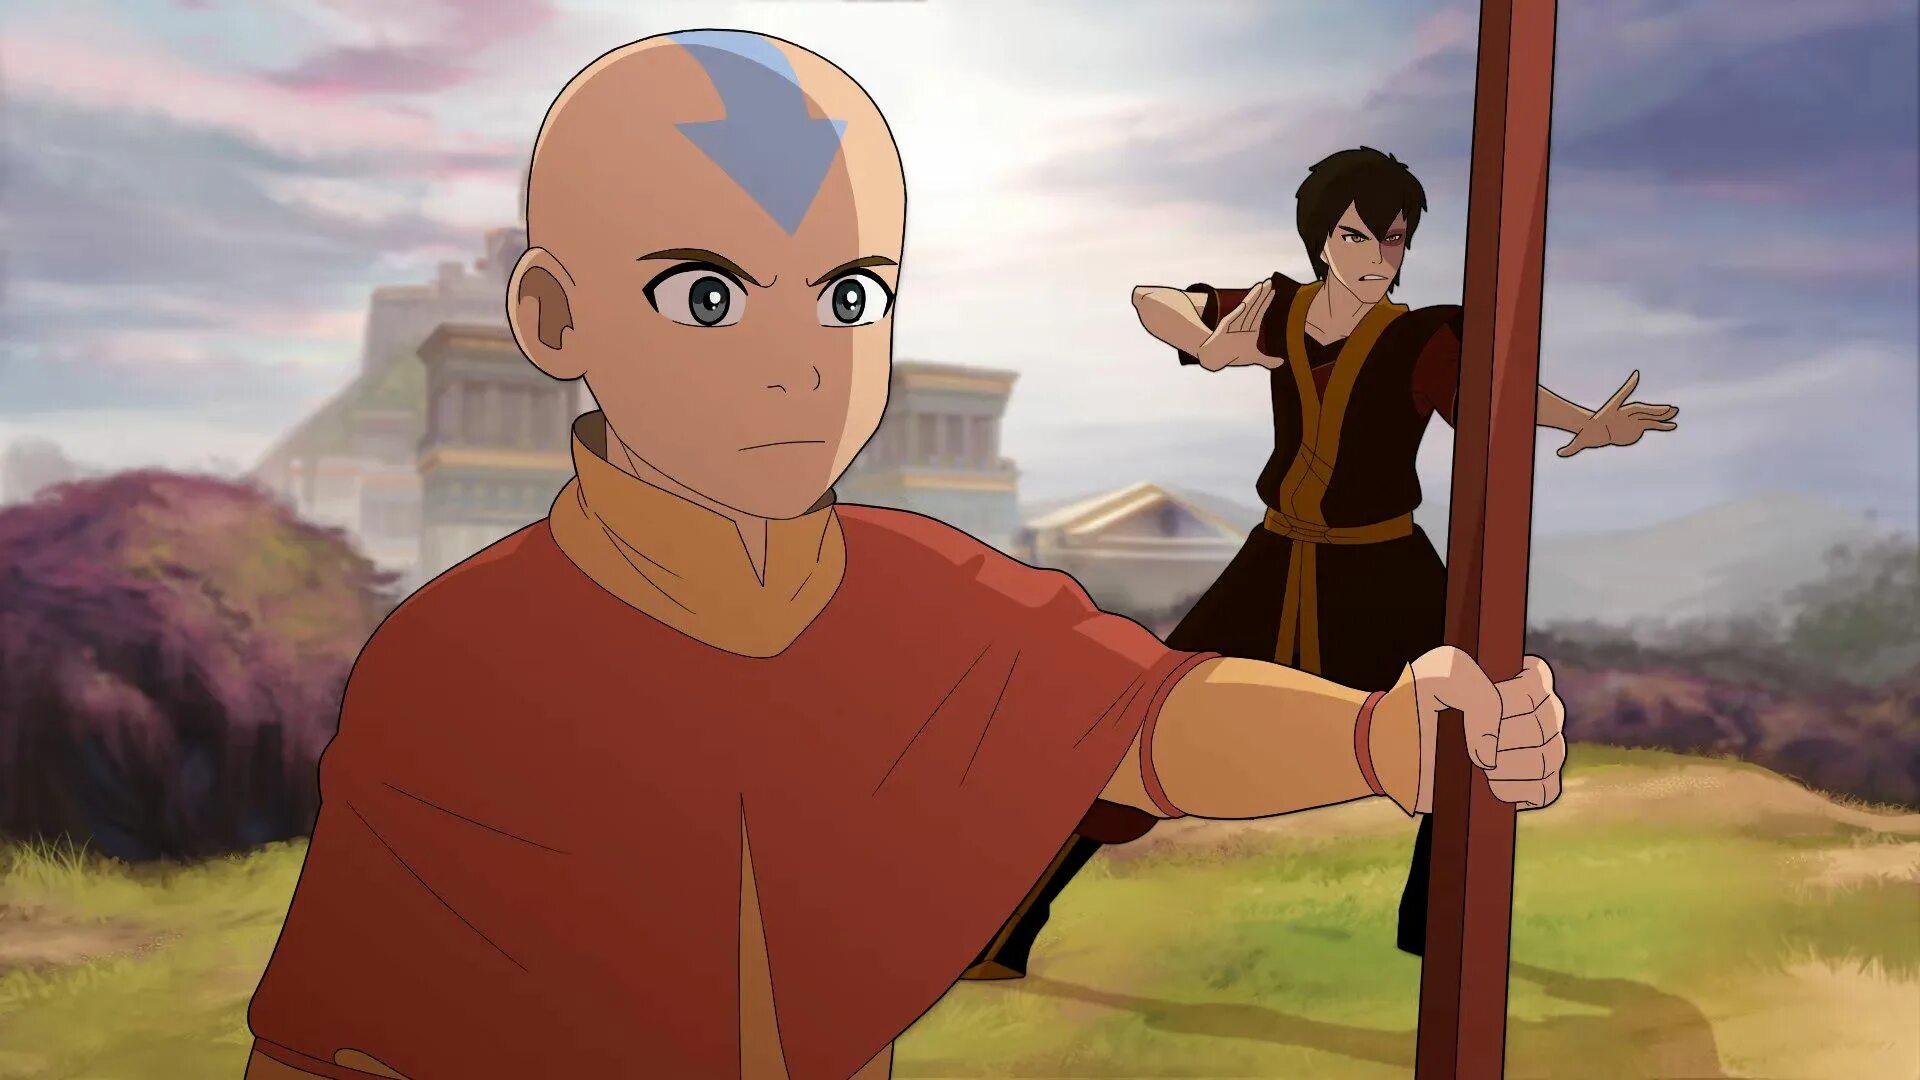 Зуко и аанг. Аватар аанг. Avatar the last airbender series